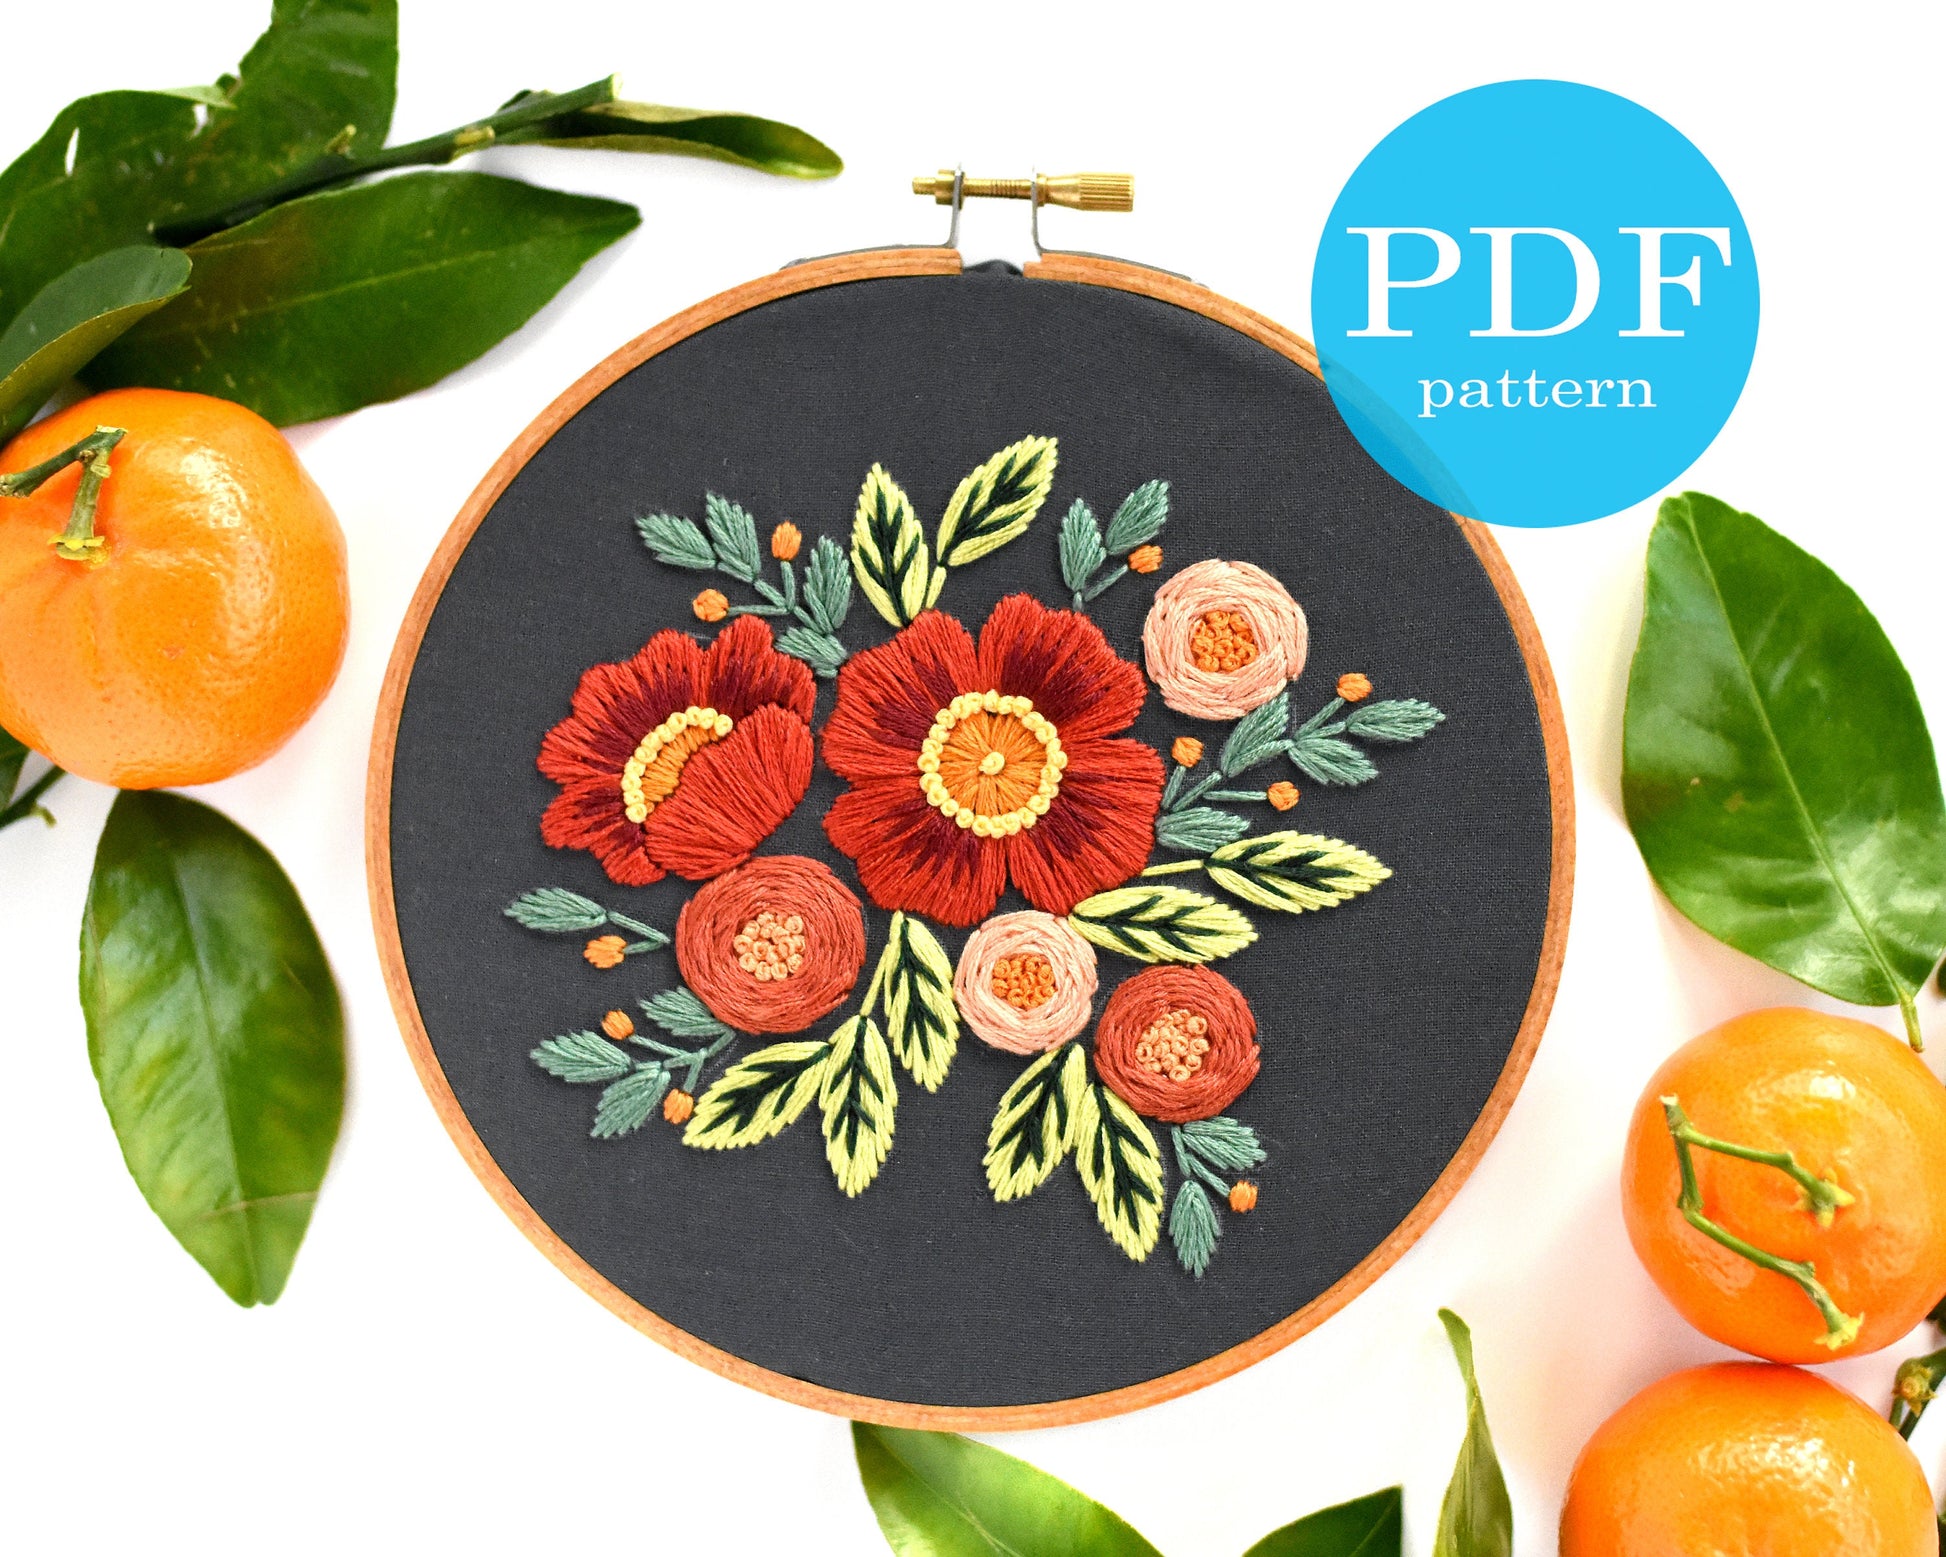 Folky Florals Embroidery Pattern. Beginner Embroidery. PDF embroidery pattern. 6" hoop. Floral Embroidery pattern. Embroidery pattern